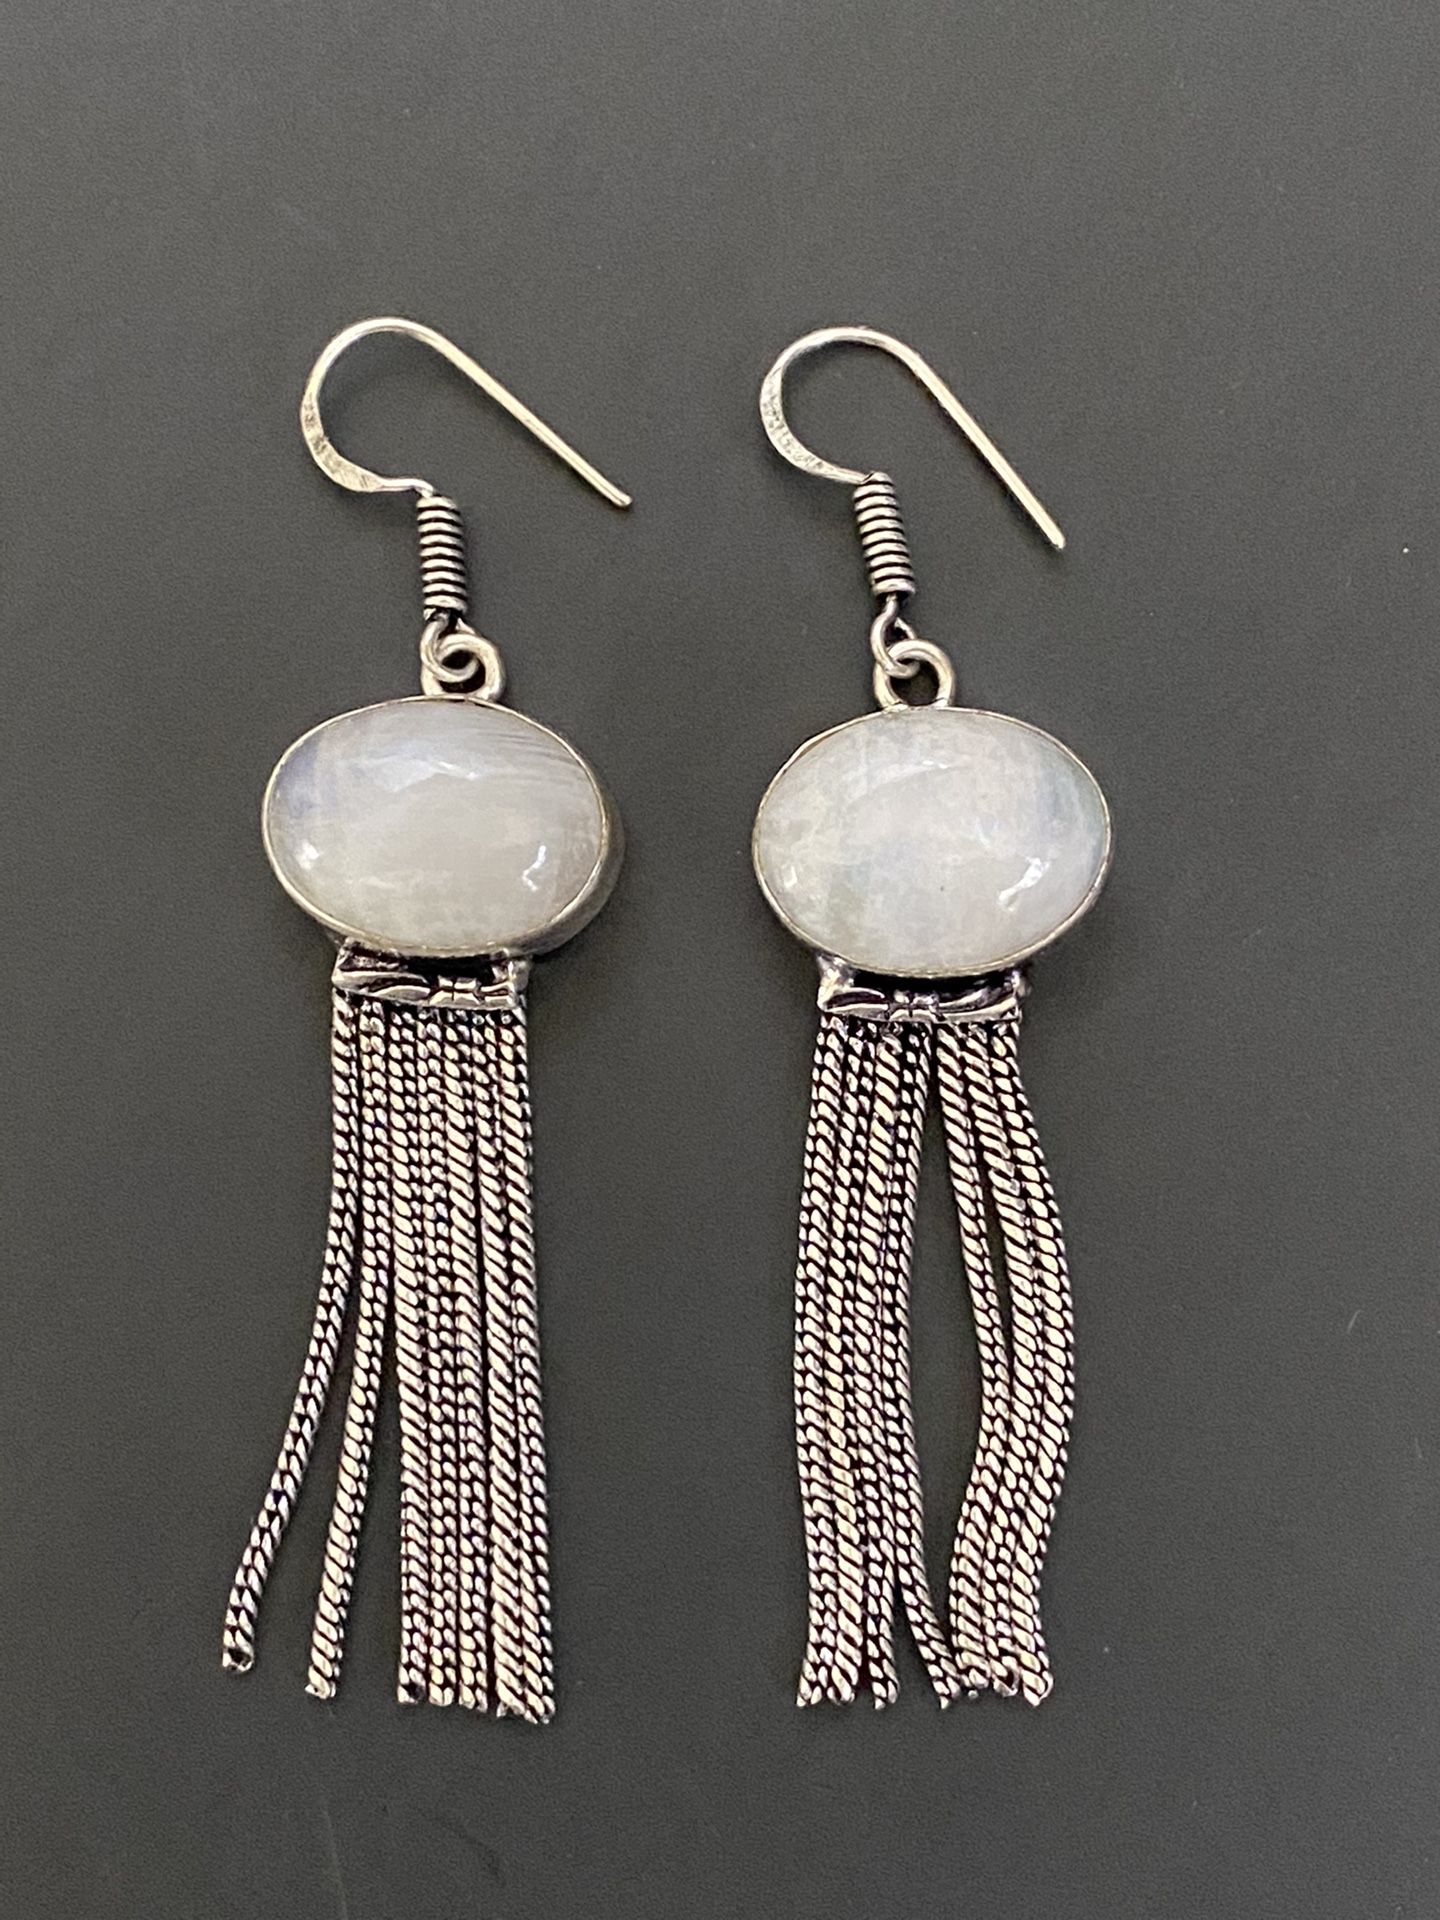 New 925 sterling silver overlay handcrafted rainbow moonstone chains earring